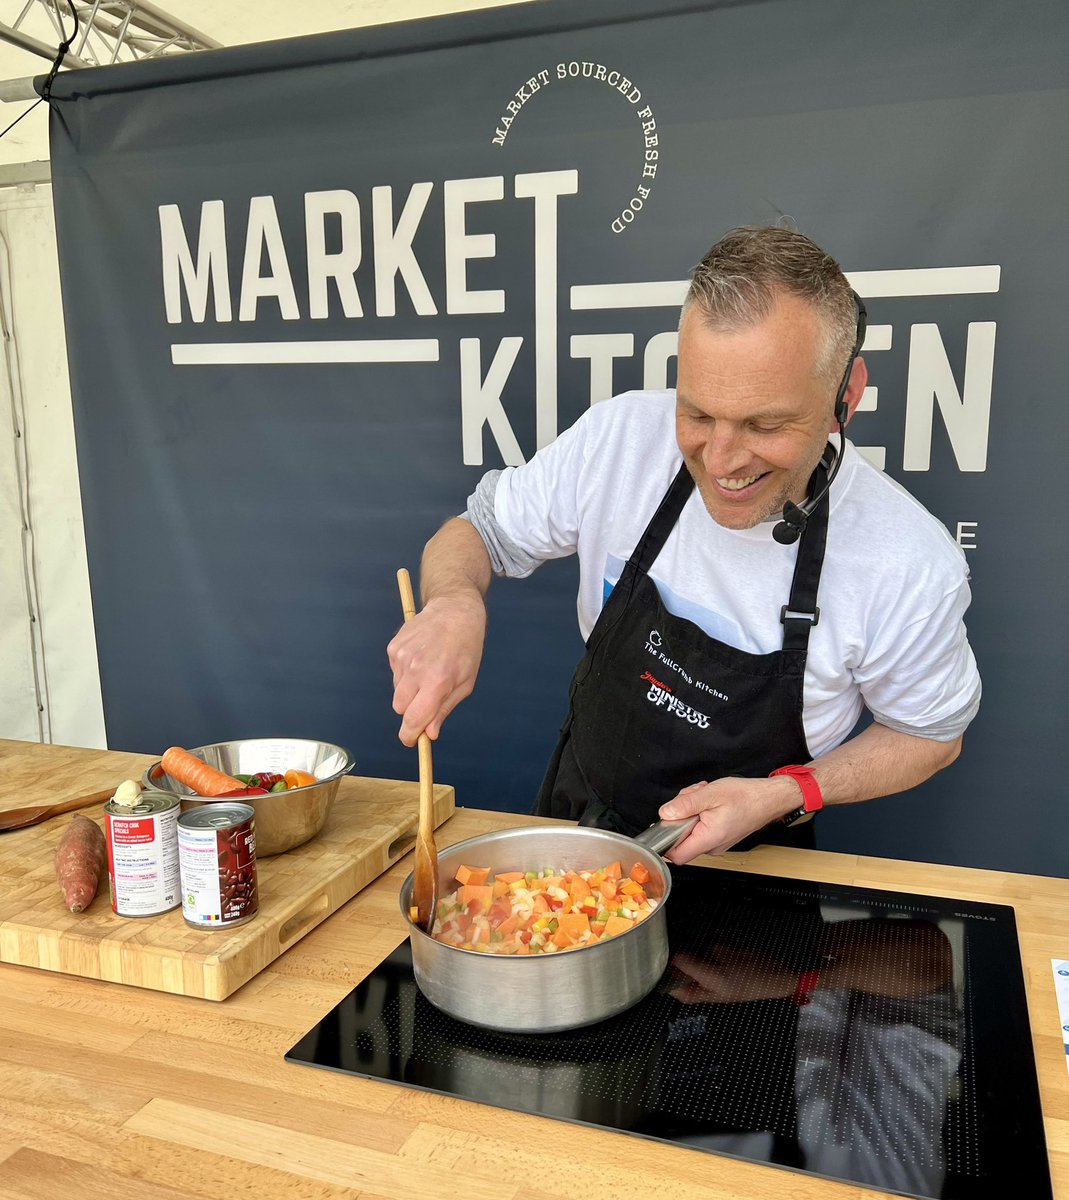 Come down to @BarnsleyMarkets until Sunday to see our fabulous Chef Chris talking about our work with @BarnsleyCouncil and @GoodfoodBarns - helping people have #MoreMoneyInYourPocket